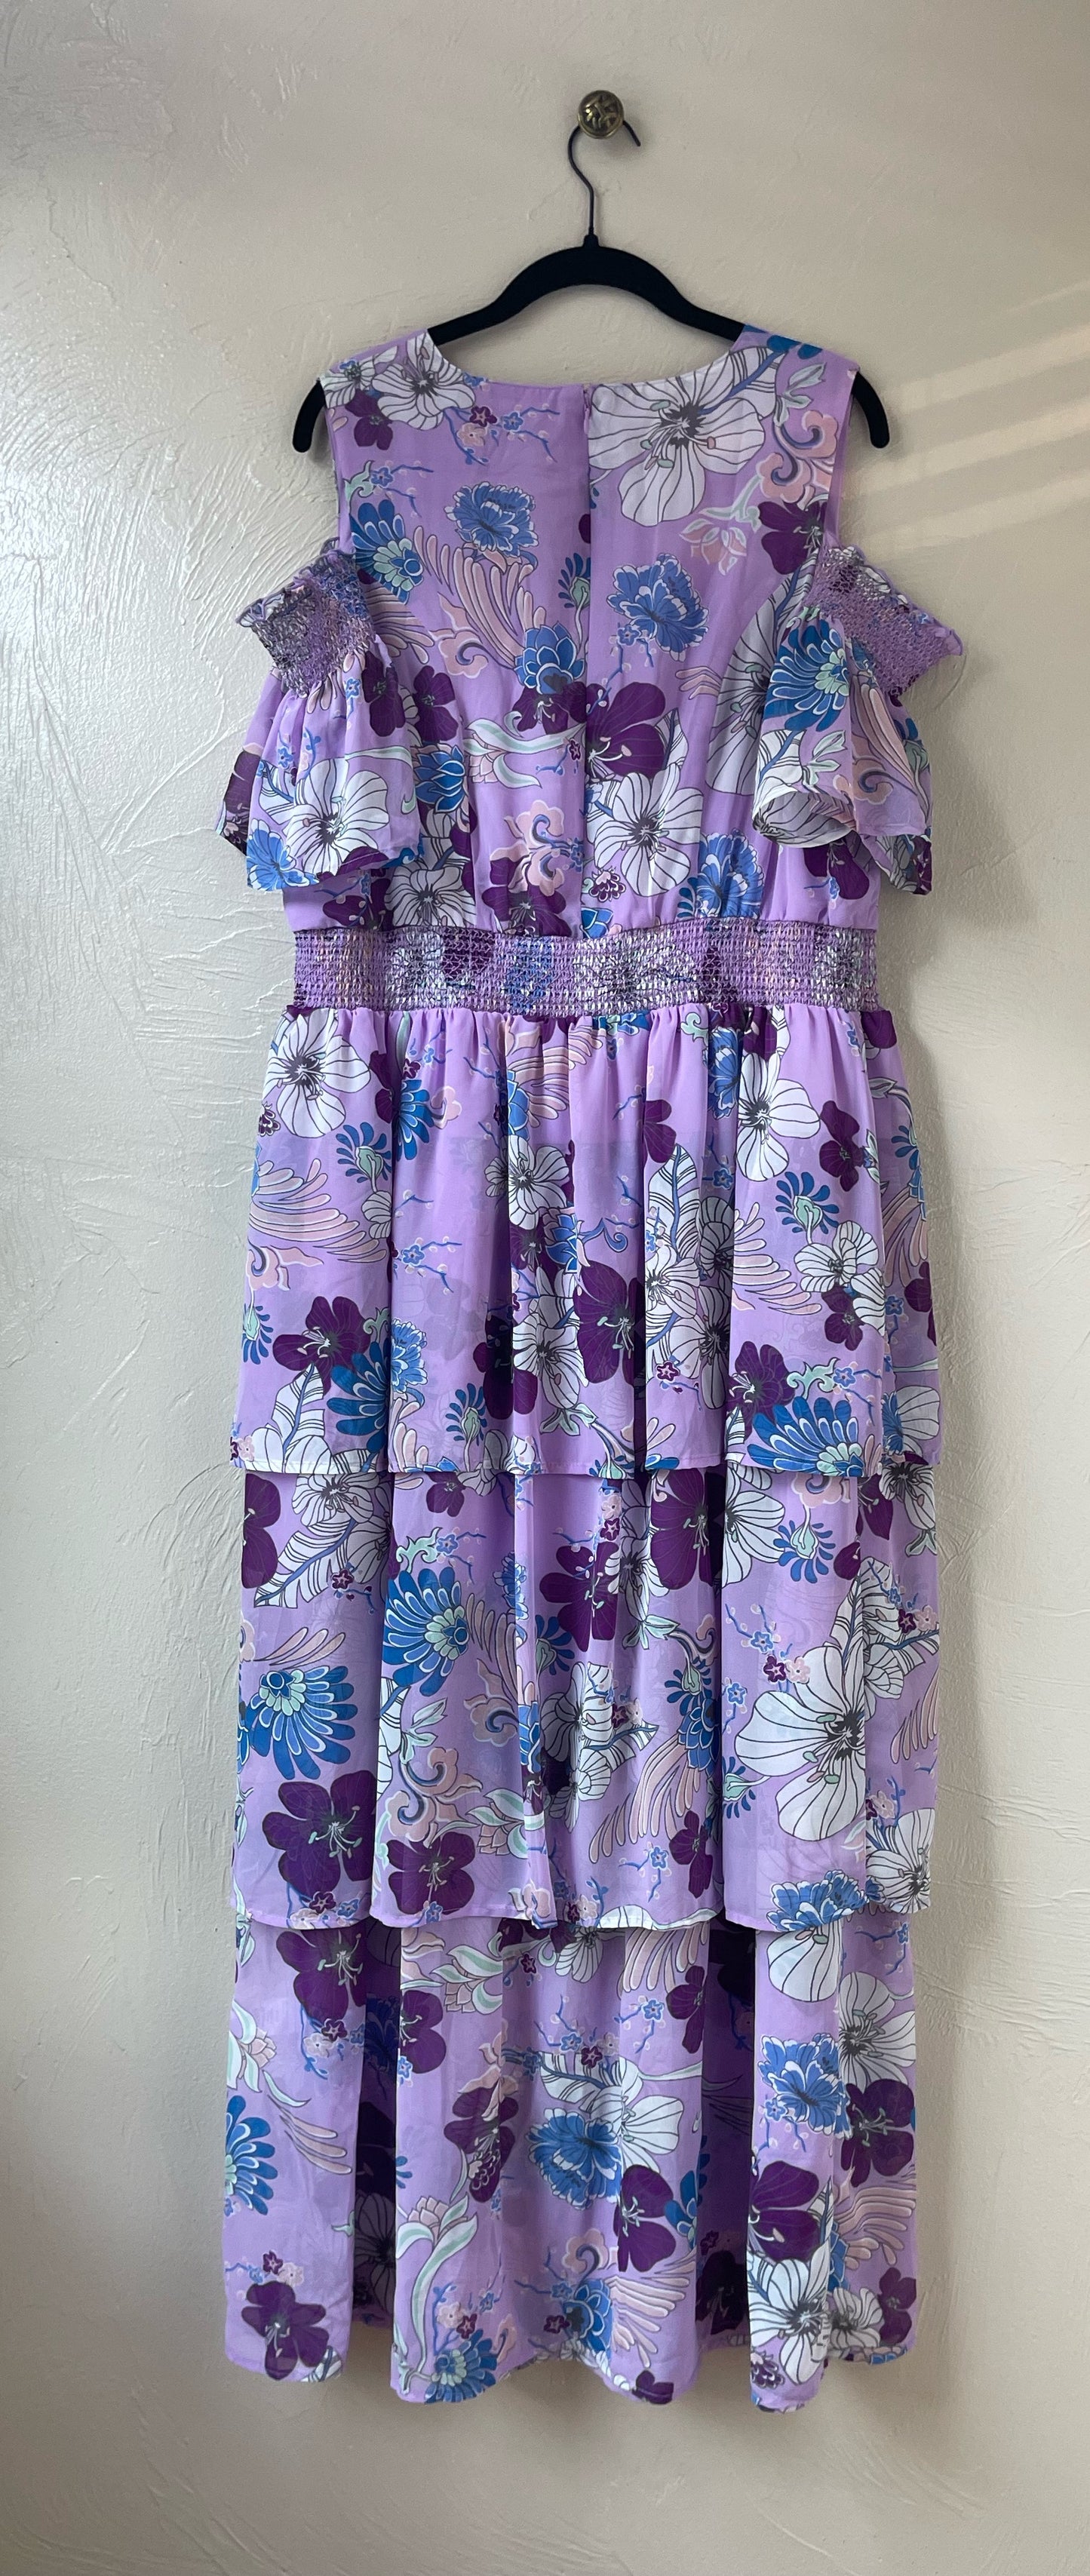 Purple Floral Tiered Ruffle Dress